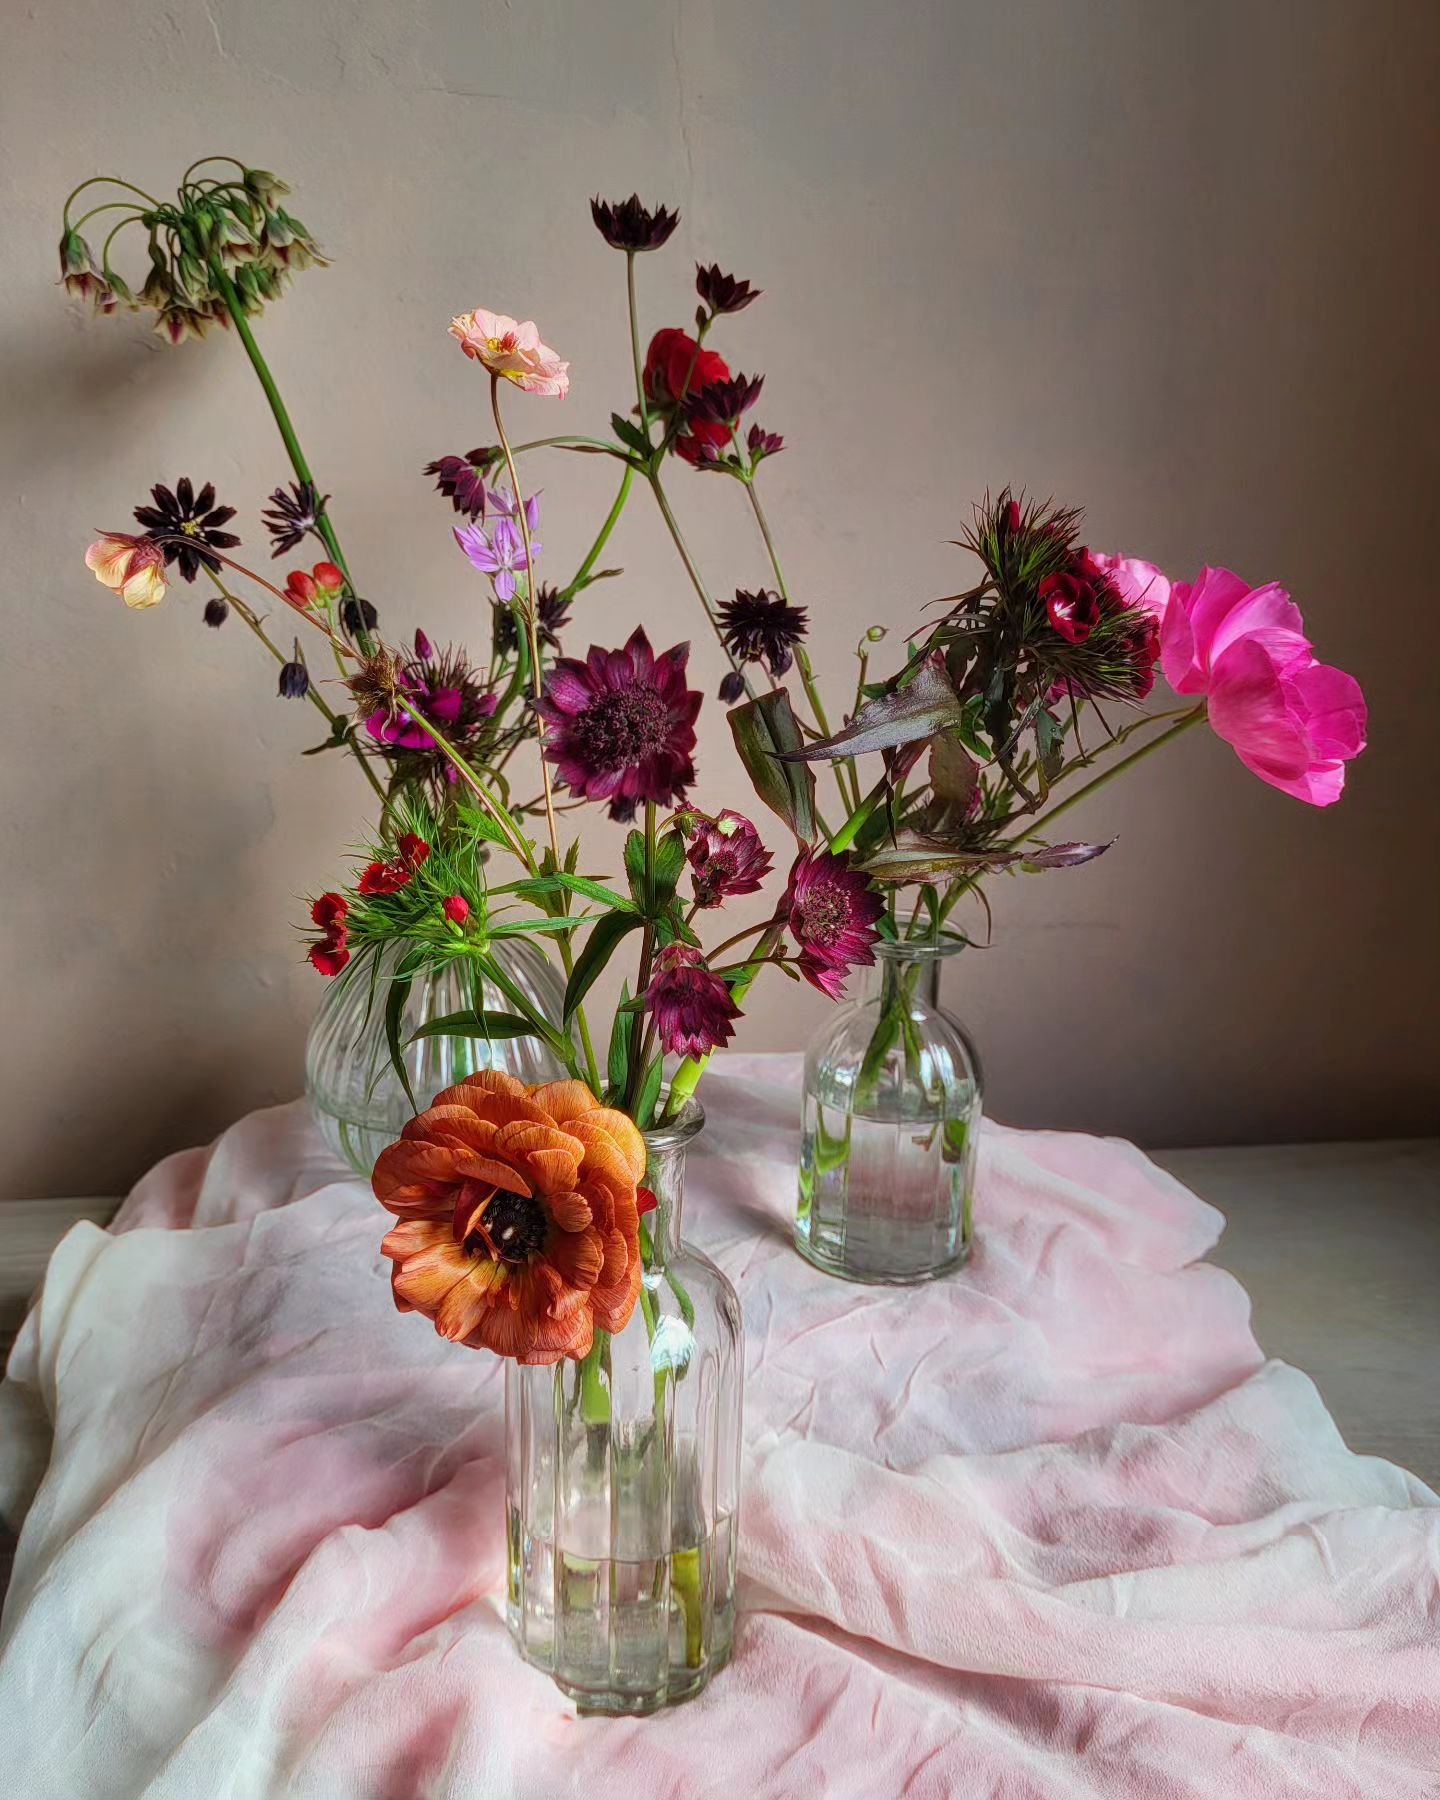 BUDS// and those ranunculus that everyone guessed were poppies.
Delicate and utterly divine.
#weddingflorist